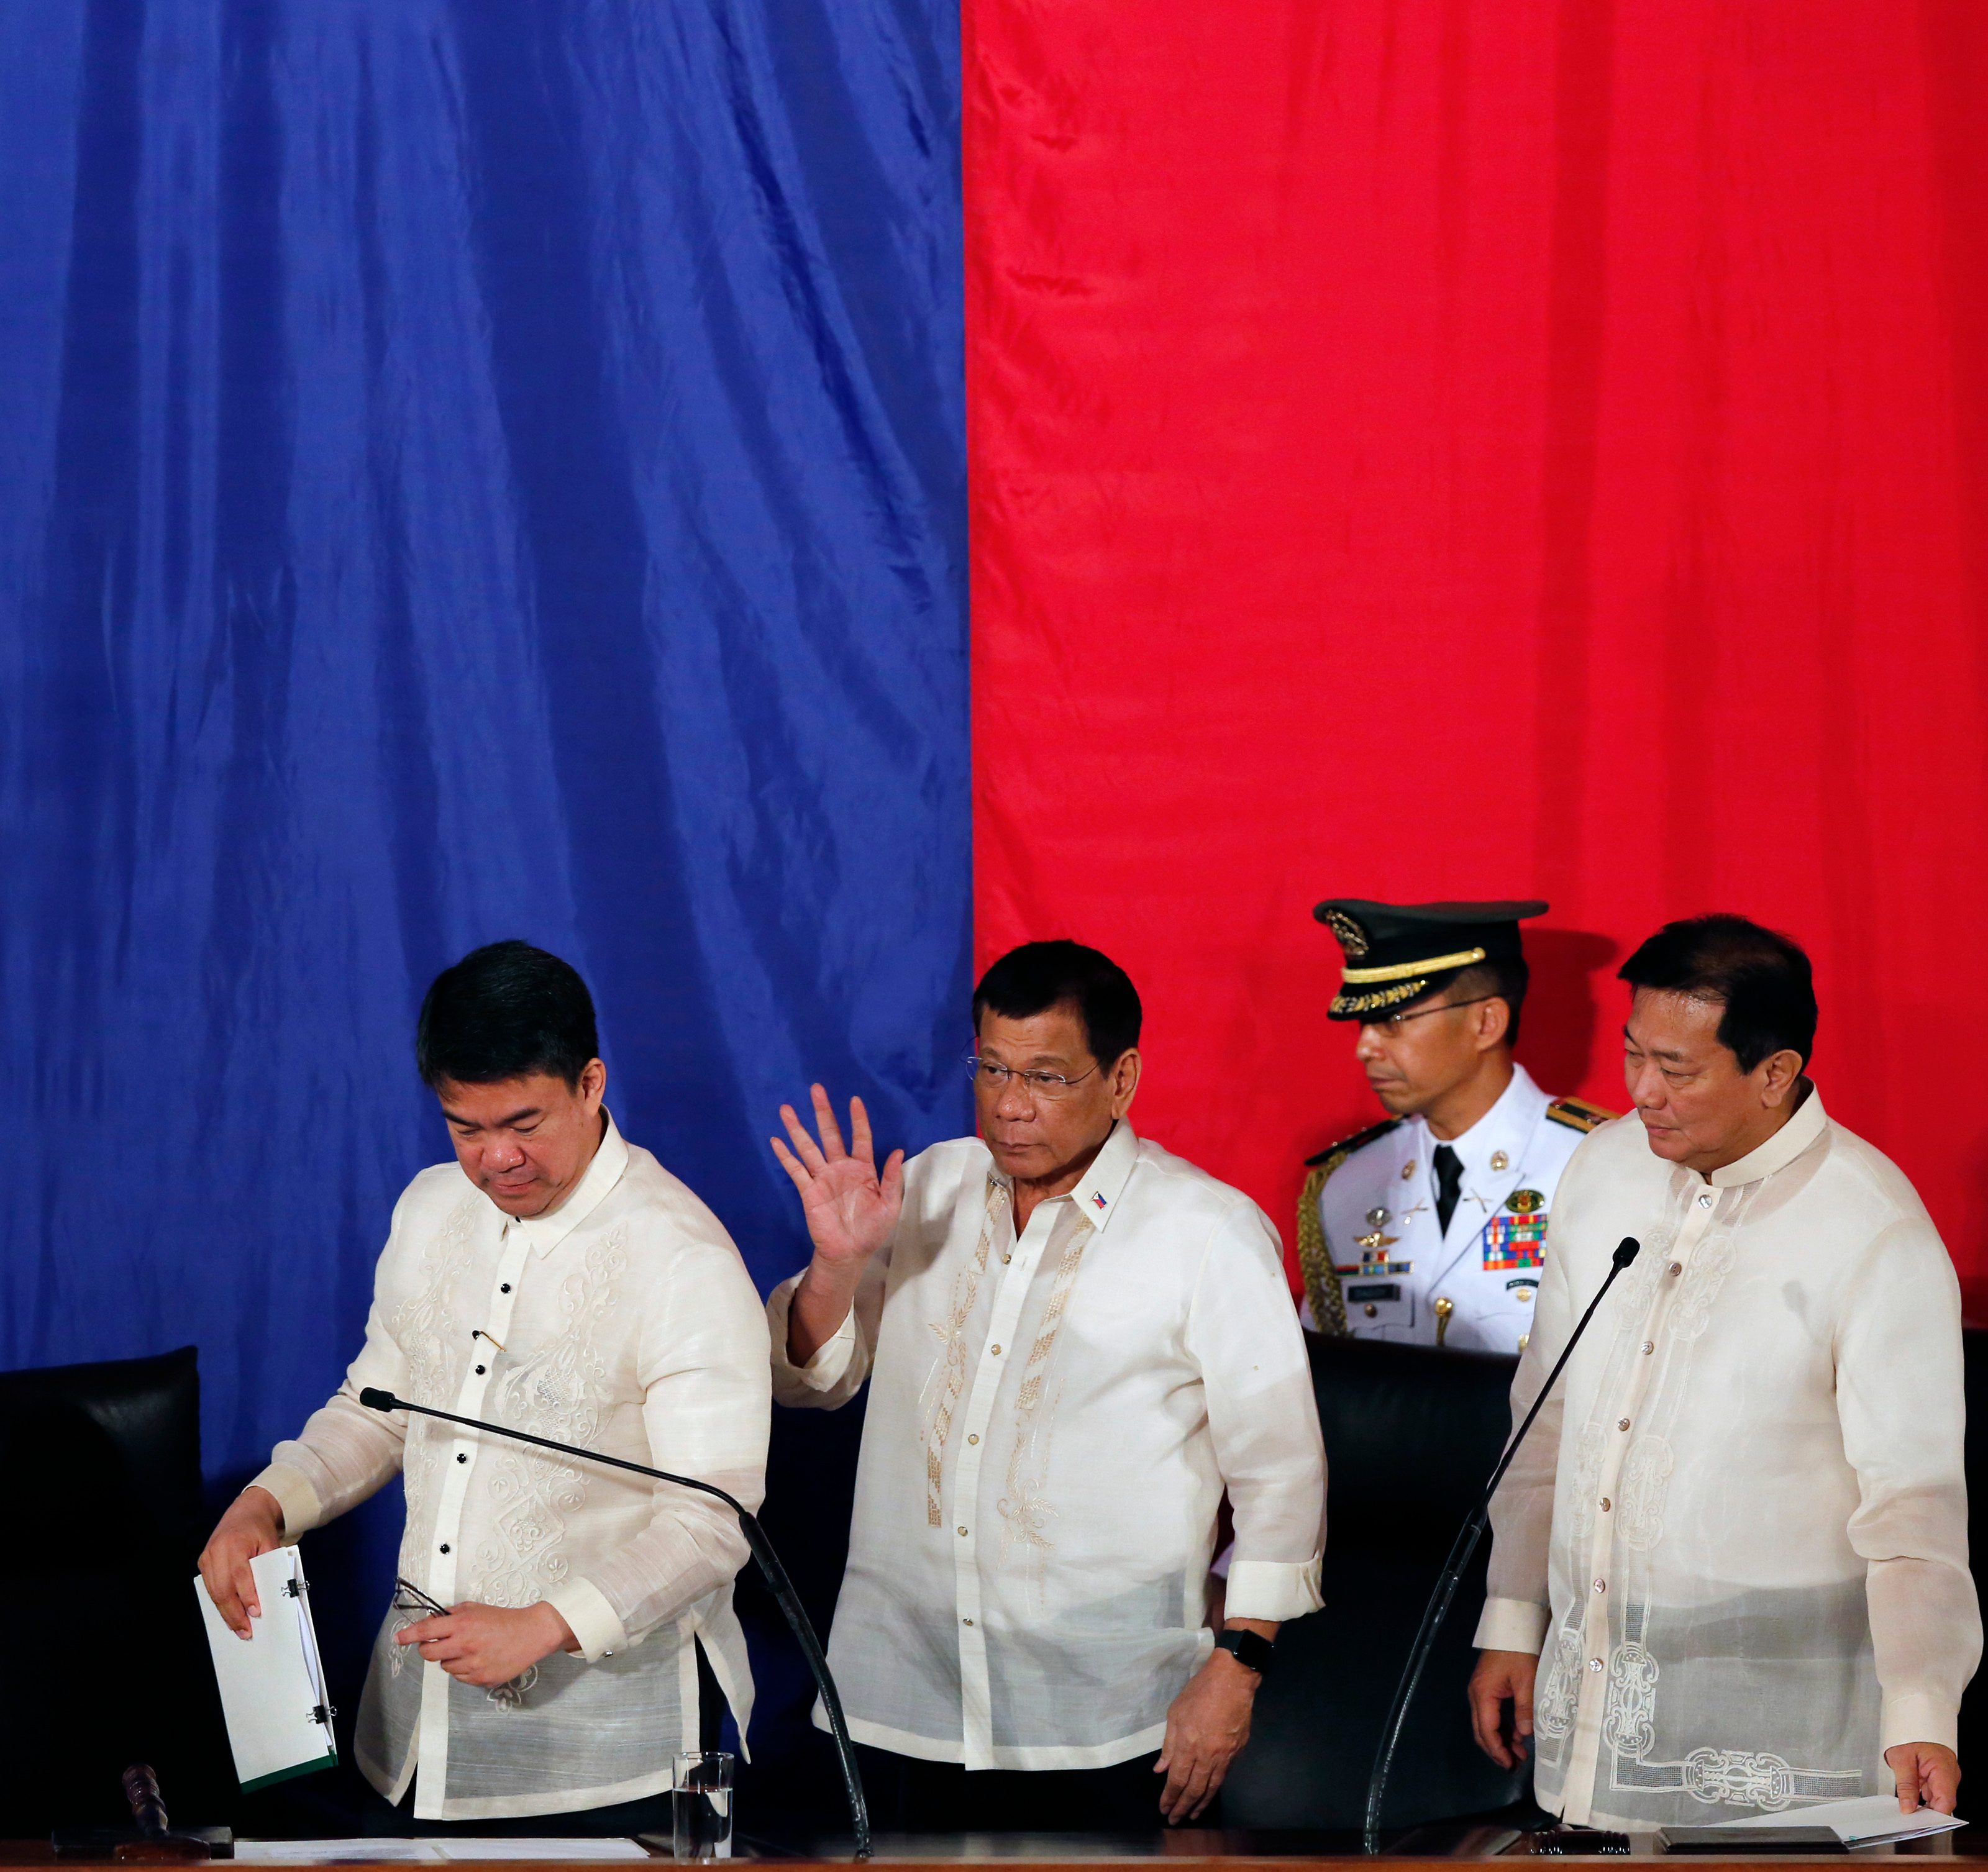 TOP ALLIES. Duterte joined by his lieutenants in the 17th Congress – Alvarez and Senate President Koko Pimentel. All 3 are from the ruling PDP-Laban. Photo by Francis R. Malasig/EPA   